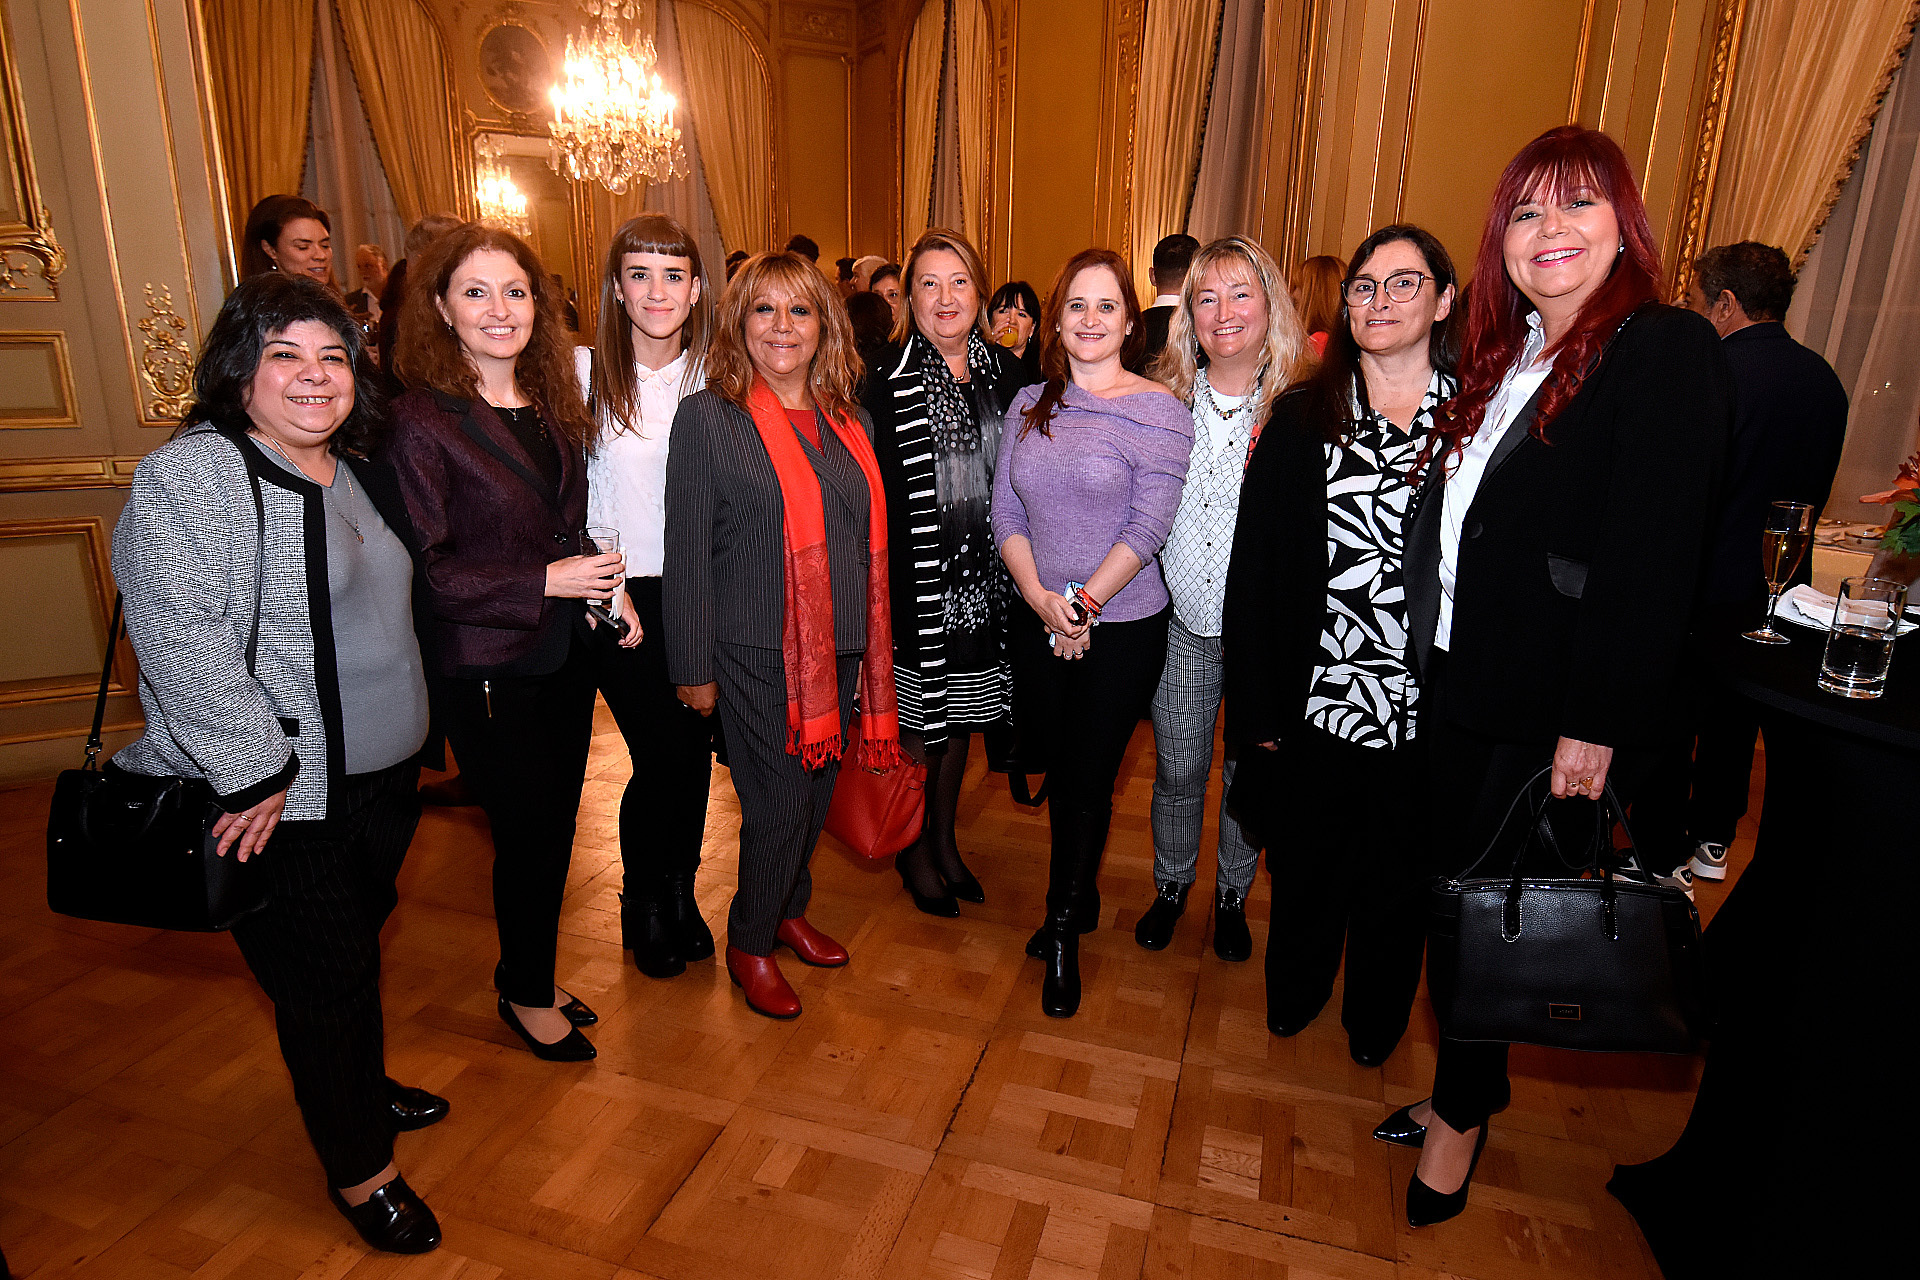 Ana Núñez, leader of Utedyc, and representatives of the Fuerza Sindical Women's Table 